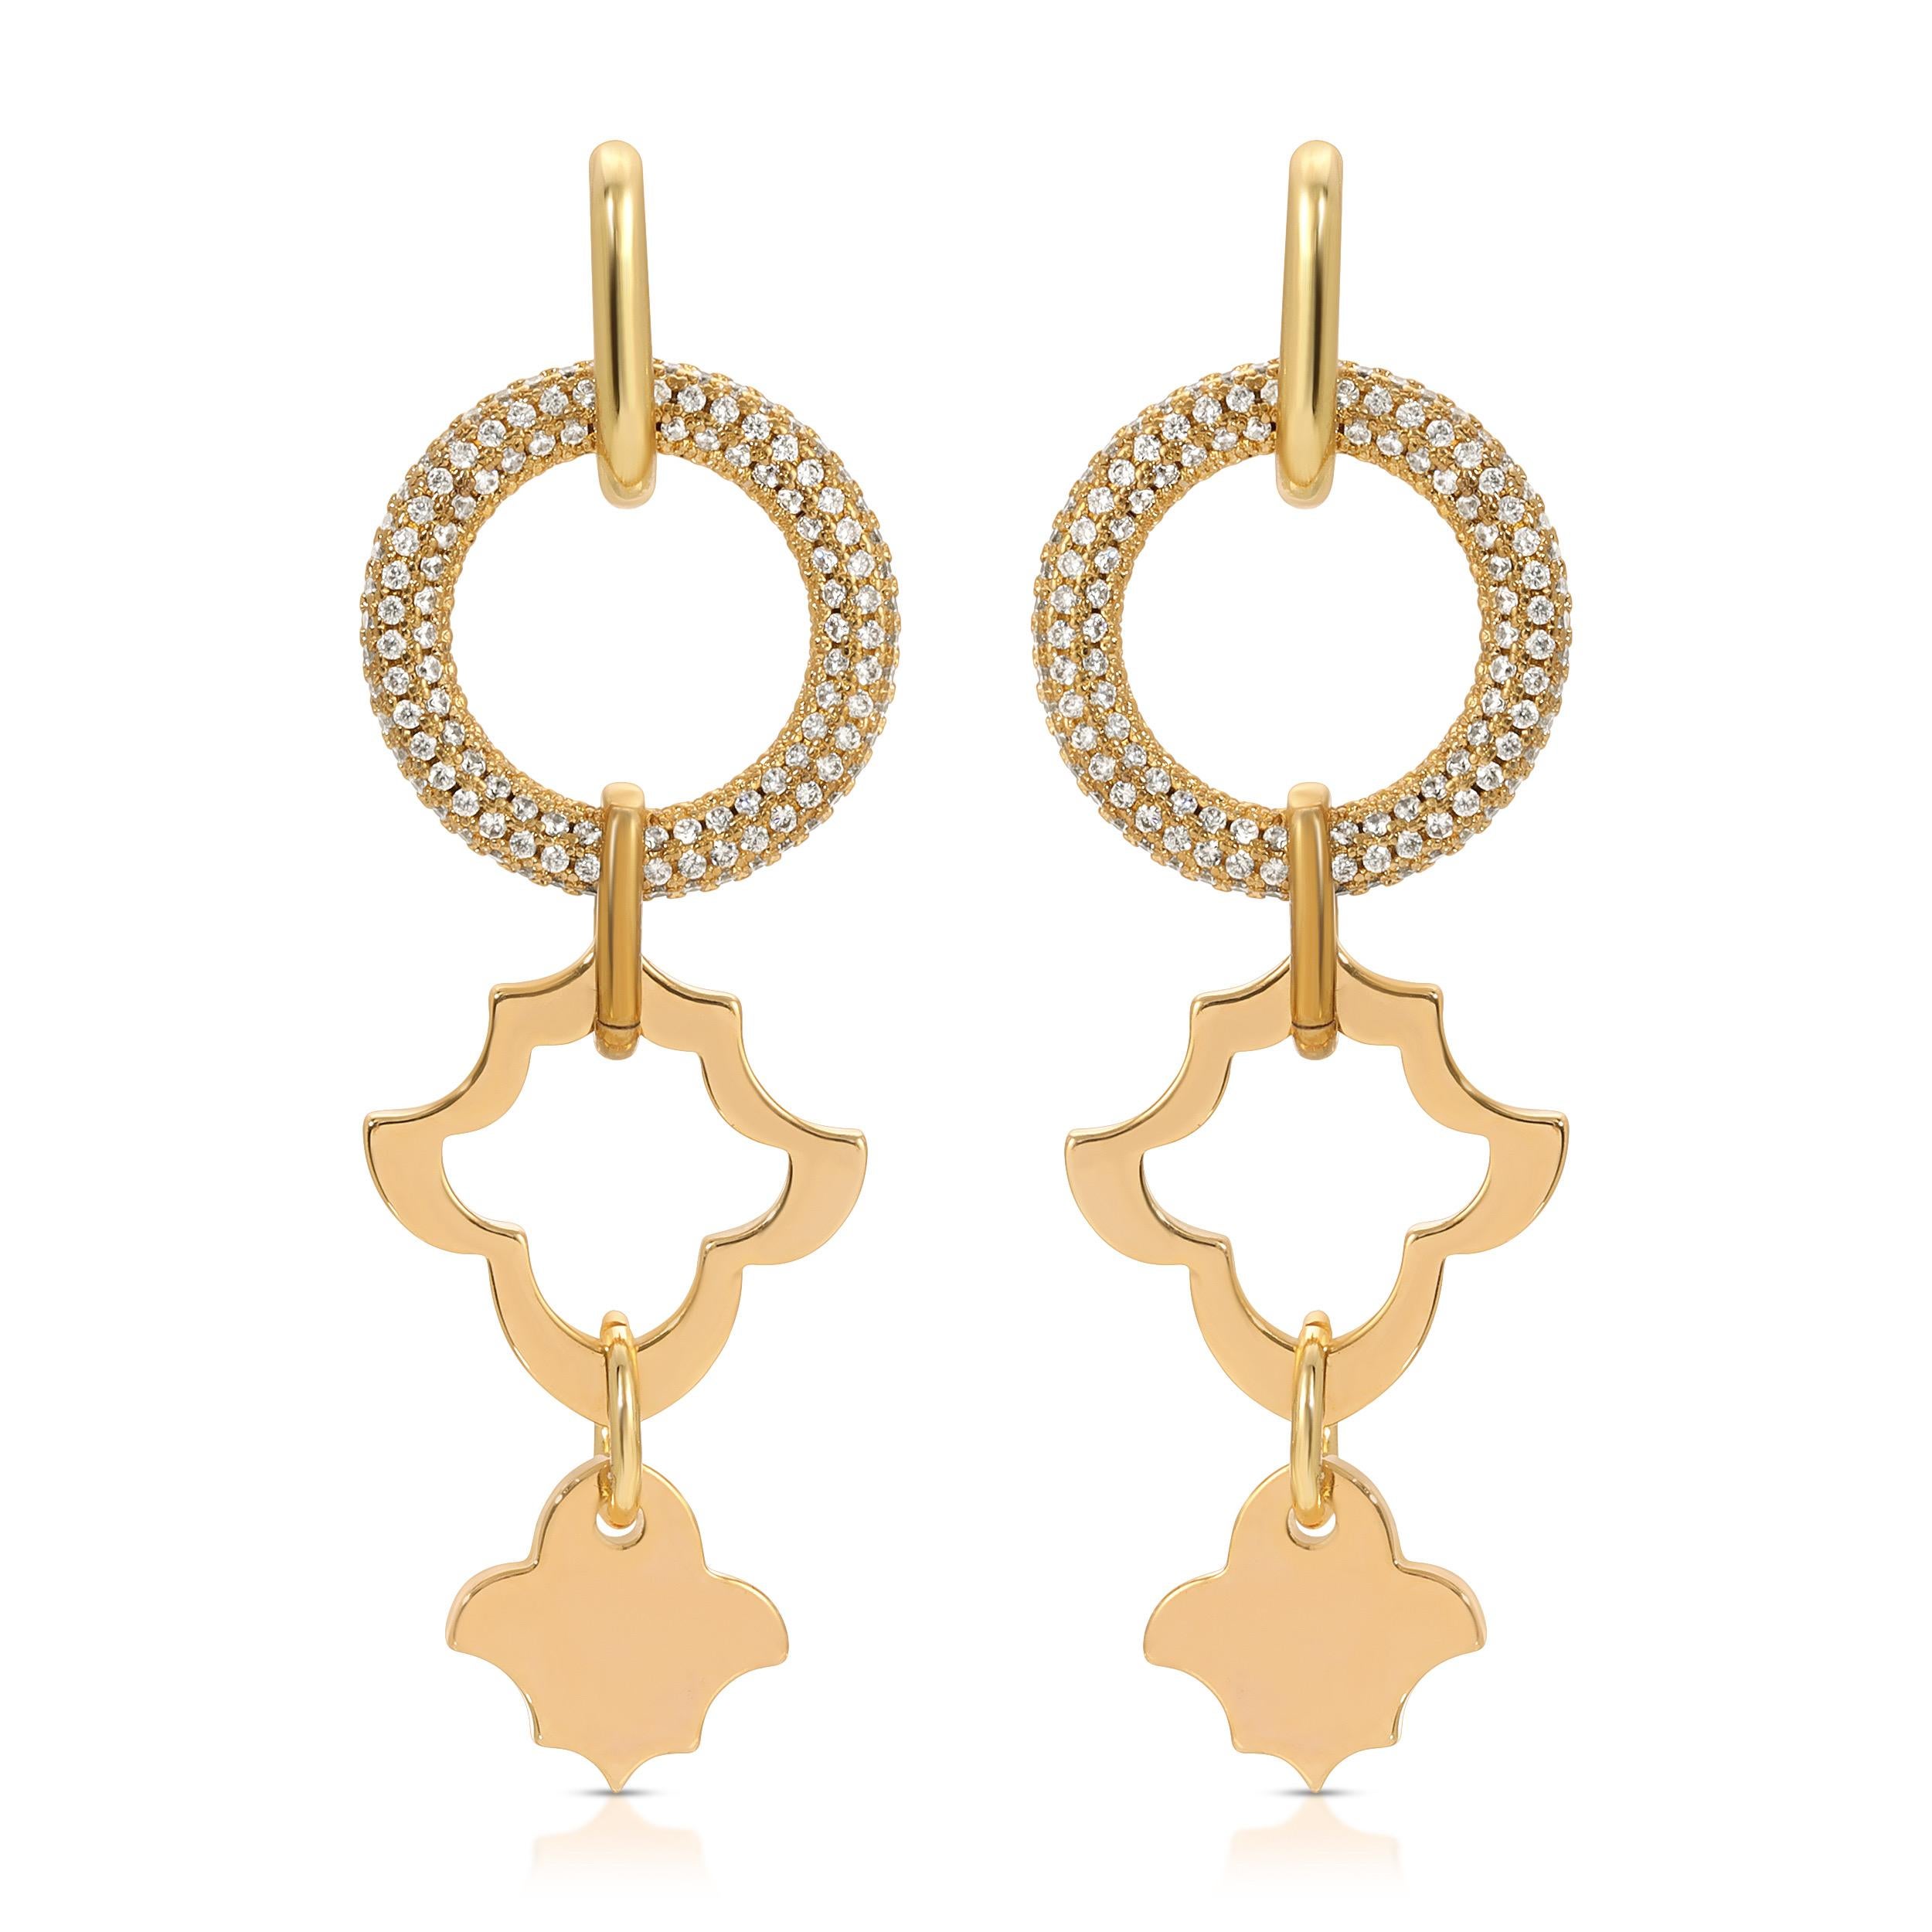 Add a touch of sparkle to any outfit with these Aramis Micro Pave Earrings. Featuring two signature motif charms and a micro pave charm, these earrings will help you stand out from the crowd. The ear hoops are made from gold plated 925 sterling